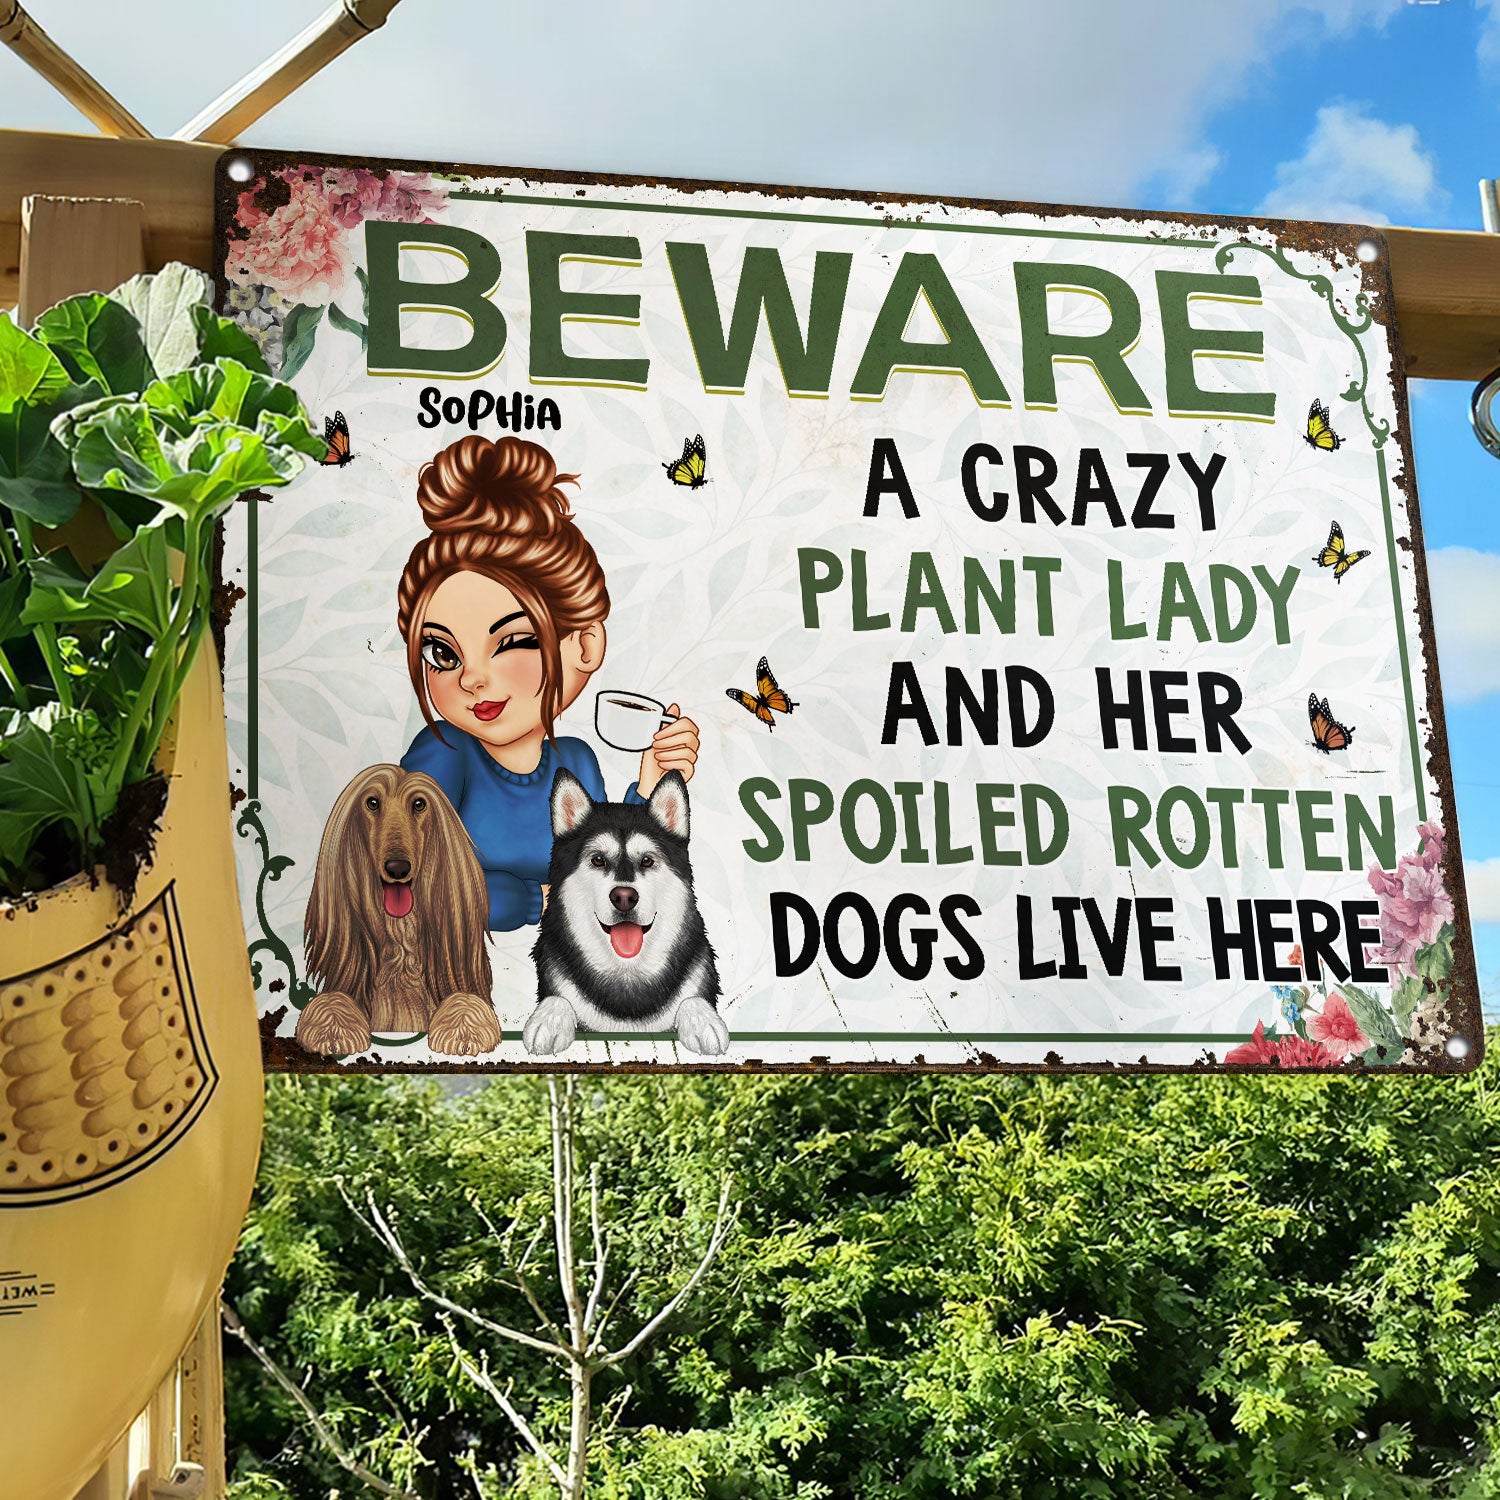 A Crazy Plant Lady & Her Spoiled Rotten Dogs - Backyard Sign, Gift For Gardening Lovers, Gardeners, Dog Lovers - Personalized Classic Metal Signs